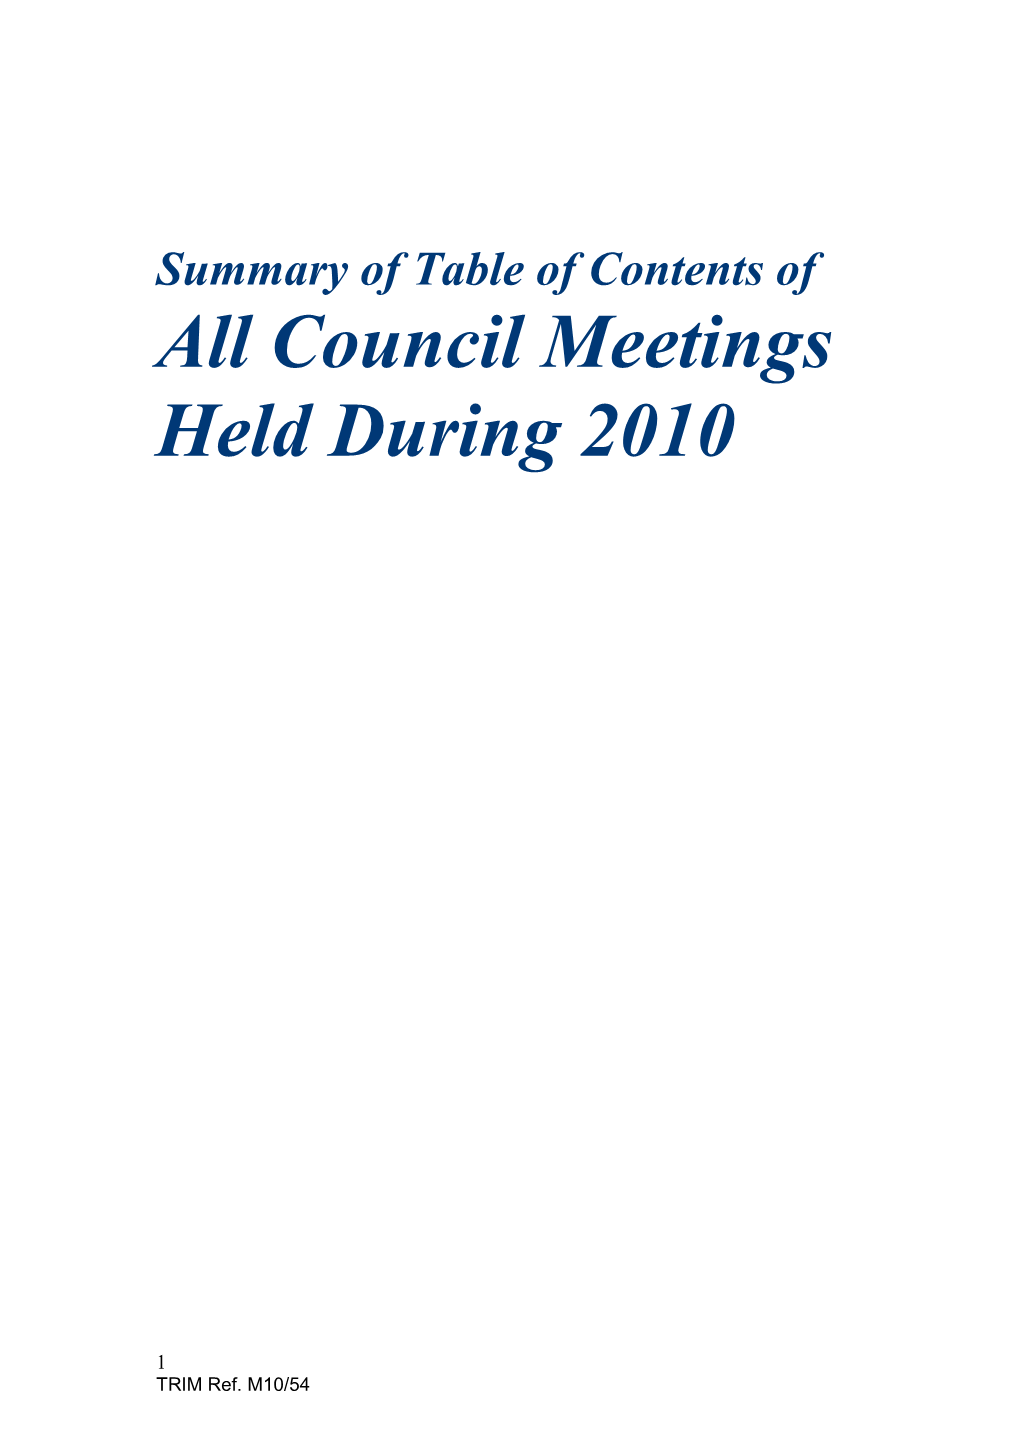 Summary of Table of Contents of All Council Meetings